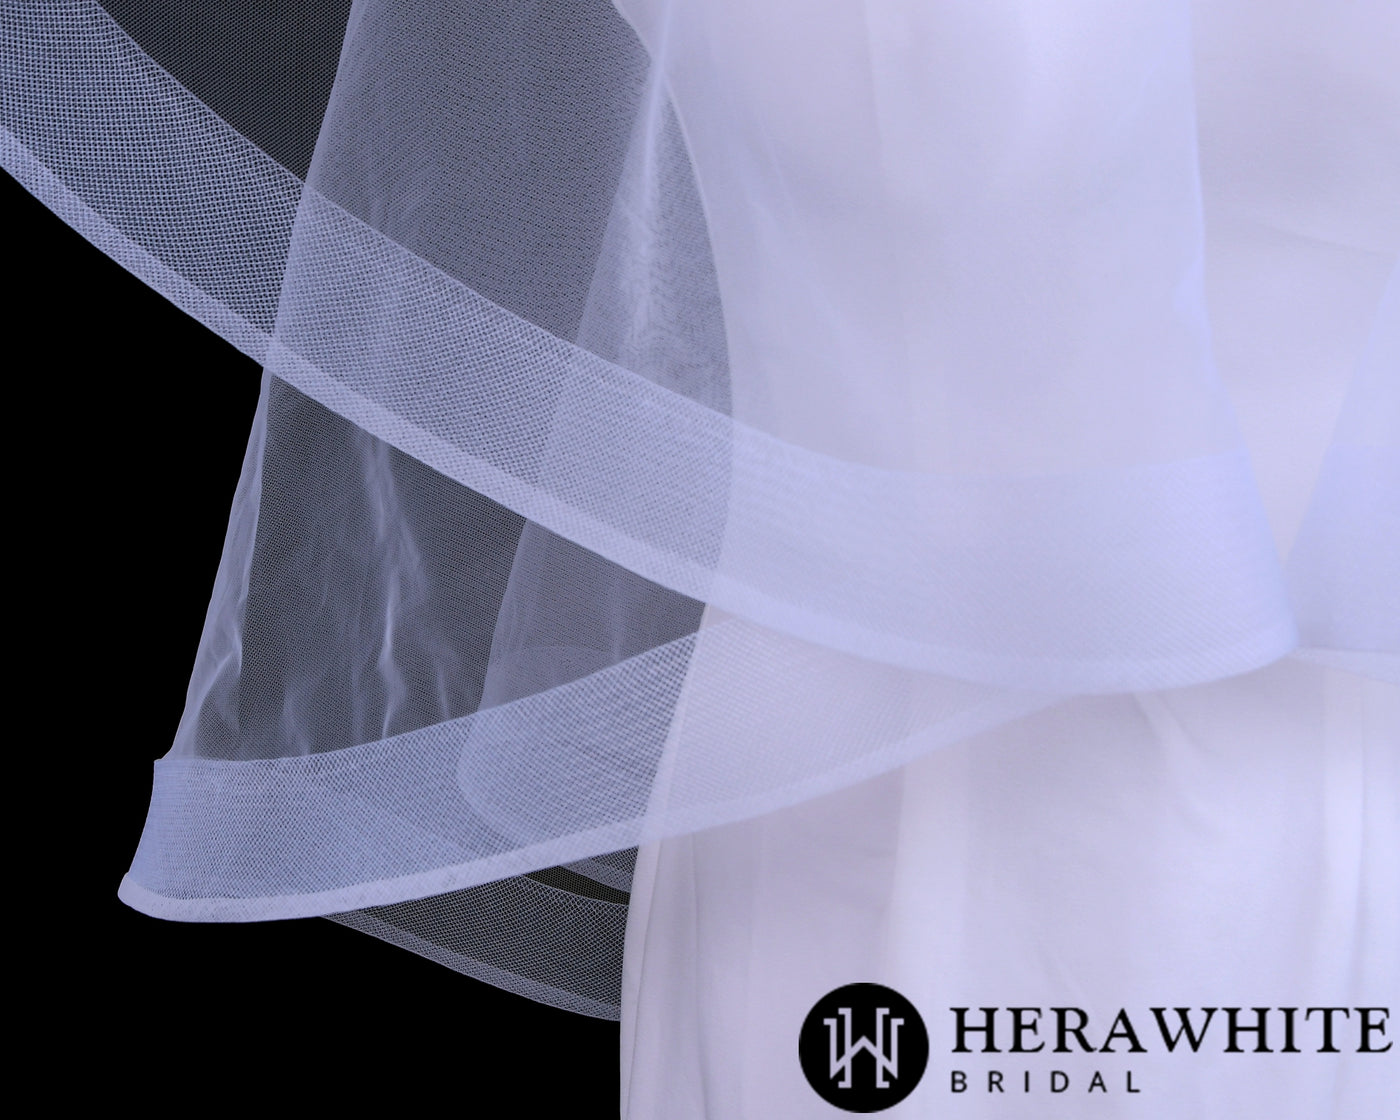 Close-up view of a white wedding dress with sheer fabric and a logo of Bergamot Bridal's White Horsehair Trim Bridal Veil in the corner.